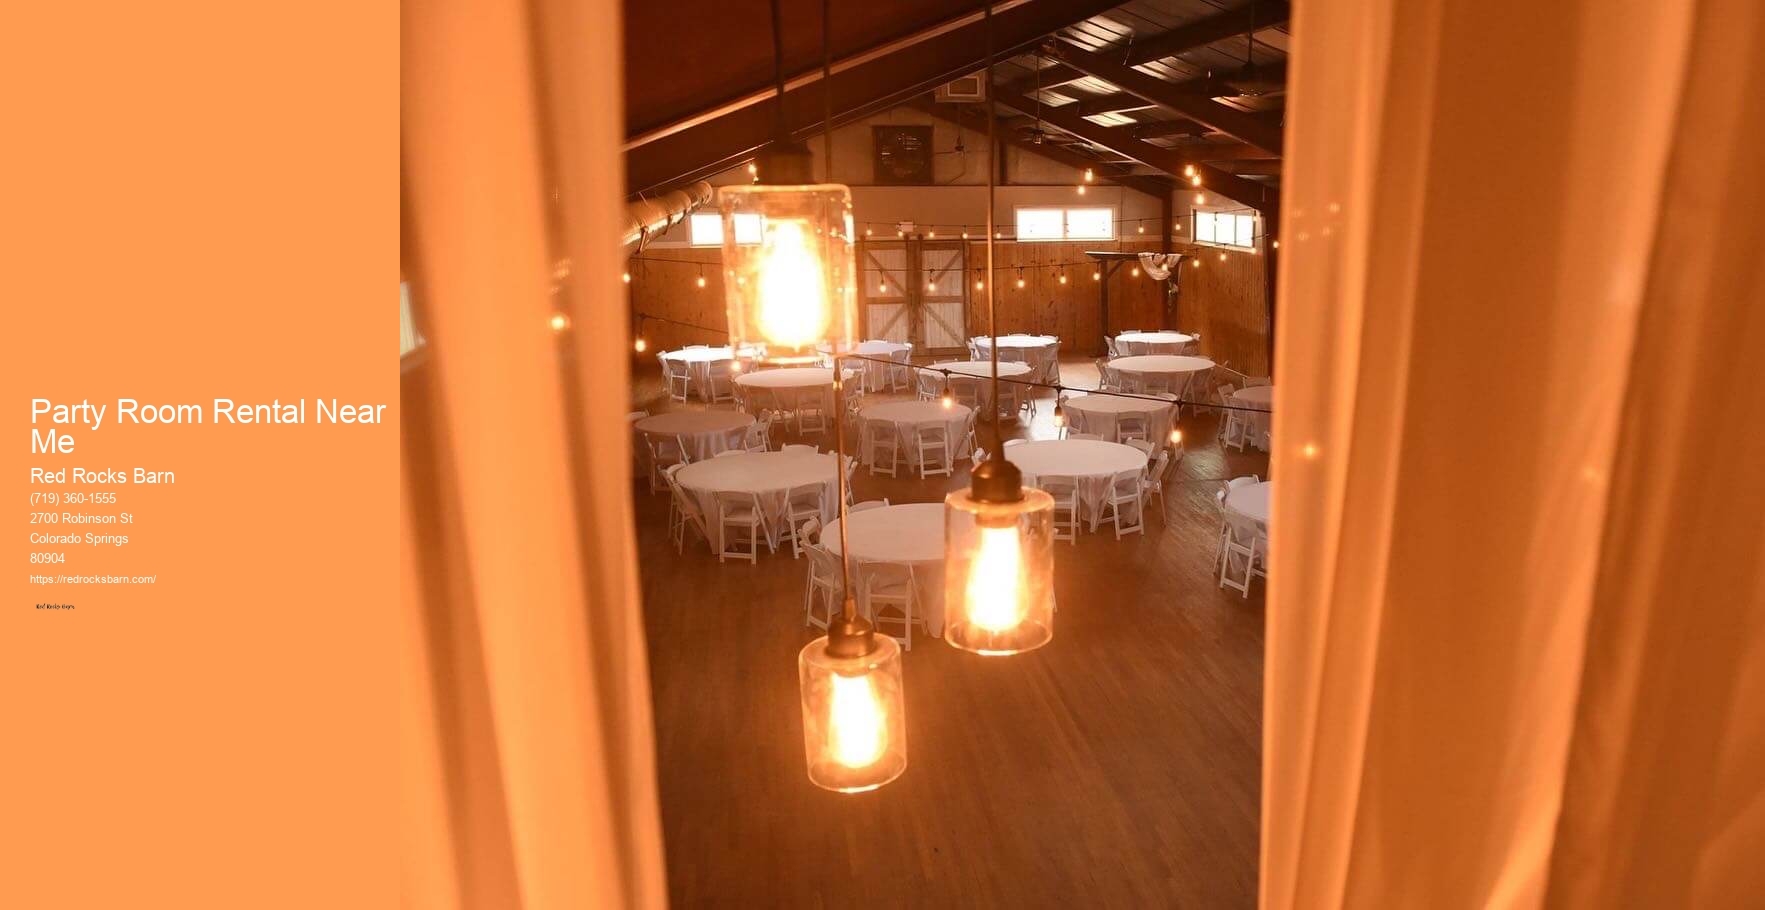 Party Room Rental Near Me